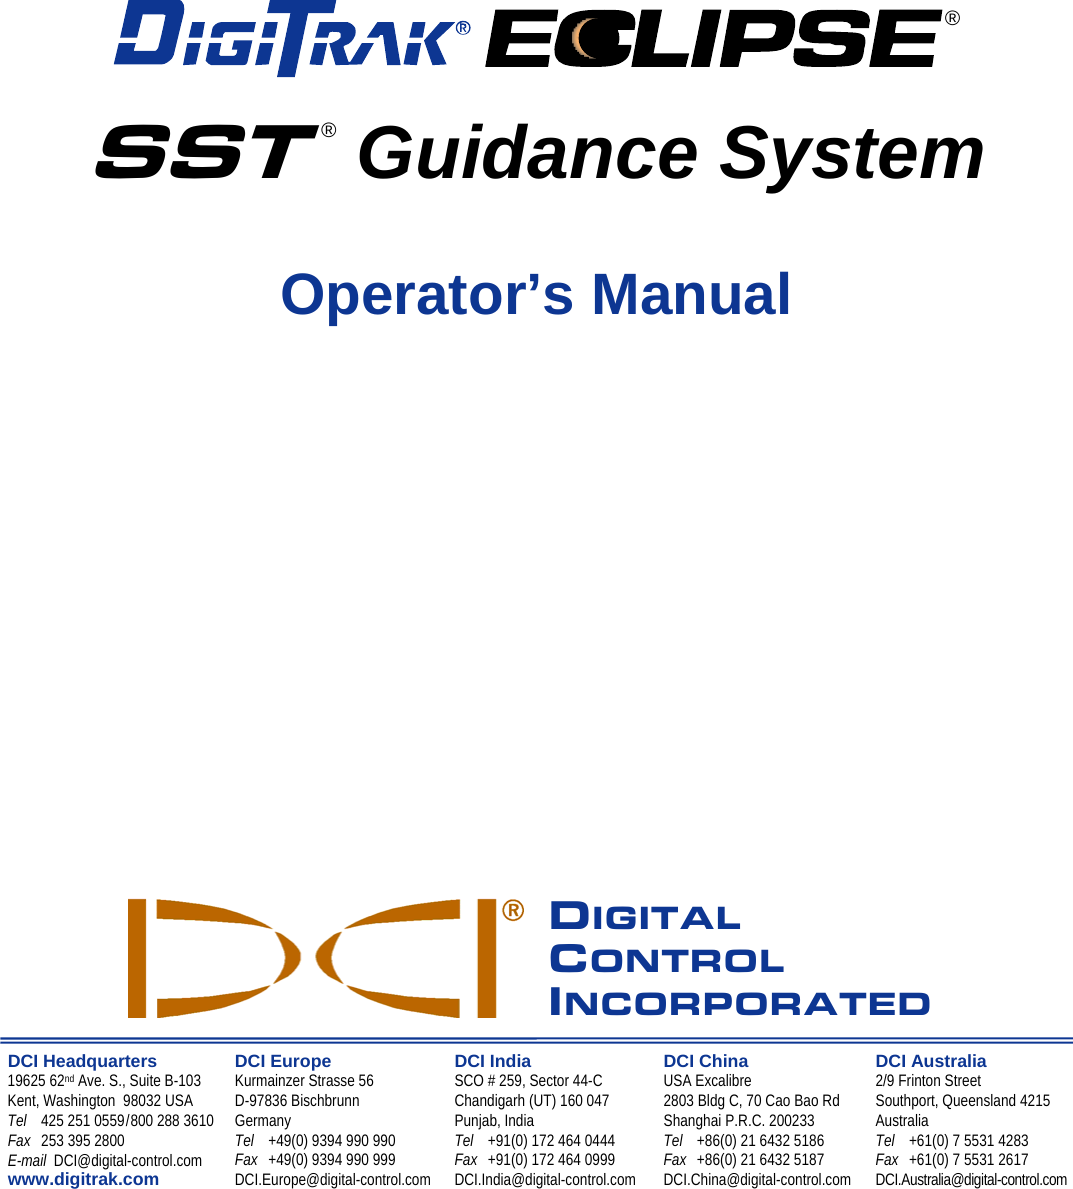            ® SST ® Guidance System  Operator’s Manual                DIGITAL CONTROL INCORPORATED  DCI Headquarters 19625 62nd Ave. S., Suite B-103 Kent, Washington  98032 USA Tel  425 251 0559 / 800 288 3610 Fax  253 395 2800 E-mail  DCI@digital-control.com www.digitrak.com   DCI Europe Kurmainzer Strasse 56 D-97836 Bischbrunn  Germany Tel  +49(0) 9394 990 990 Fax  +49(0) 9394 990 999 DCI.Europe@digital-control.com DCI India SCO # 259, Sector 44-C Chandigarh (UT) 160 047 Punjab, India Tel  +91(0) 172 464 0444 Fax  +91(0) 172 464 0999 DCI.India@digital-control.com DCI China USA Excalibre  2803 Bldg C, 70 Cao Bao Rd Shanghai P.R.C. 200233  Tel  +86(0) 21 6432 5186 Fax  +86(0) 21 6432 5187 DCI.China@digital-control.com DCI Australia 2/9 Frinton Street Southport, Queensland 4215 Australia Tel  +61(0) 7 5531 4283 Fax  +61(0) 7 5531 2617 DCI.Australia@digital-control.com  